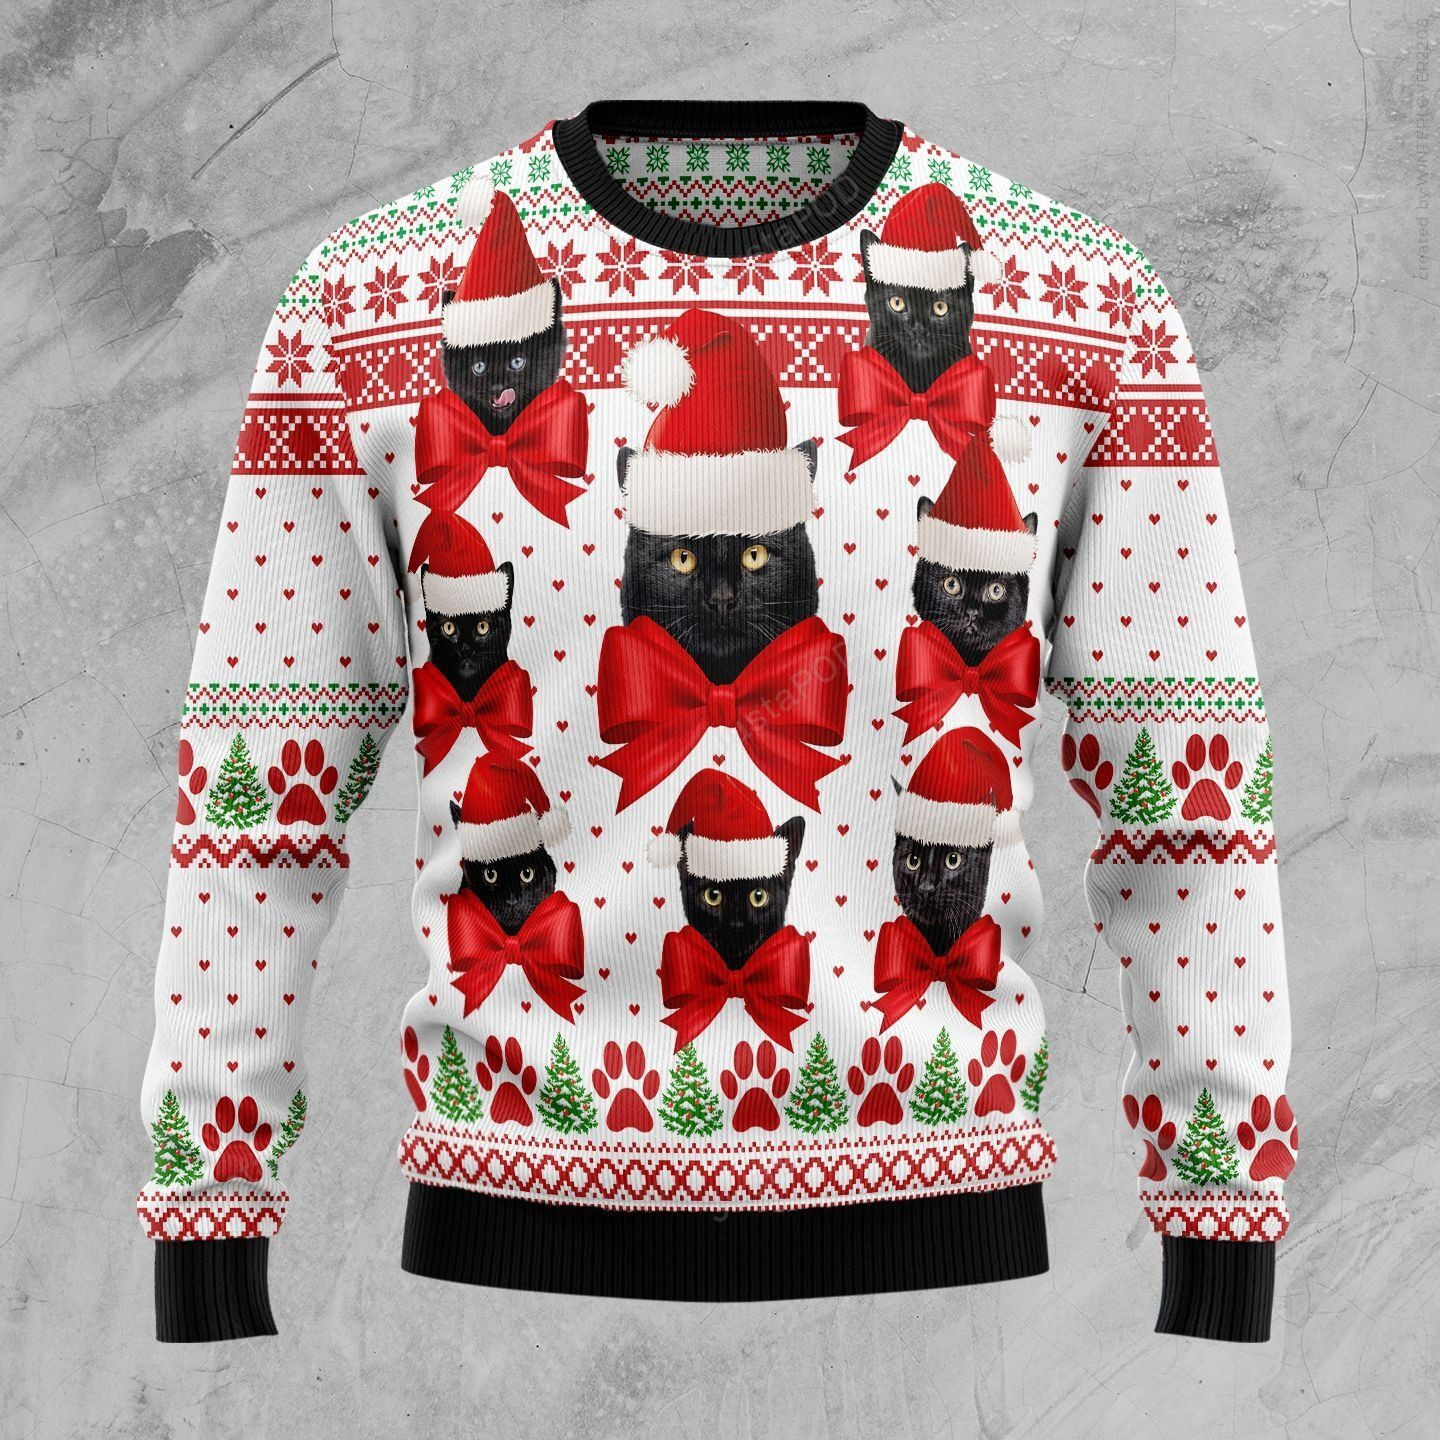 Black Cat Ball Ugly Christmas Sweater Ugly Sweater Christmas Sweaters